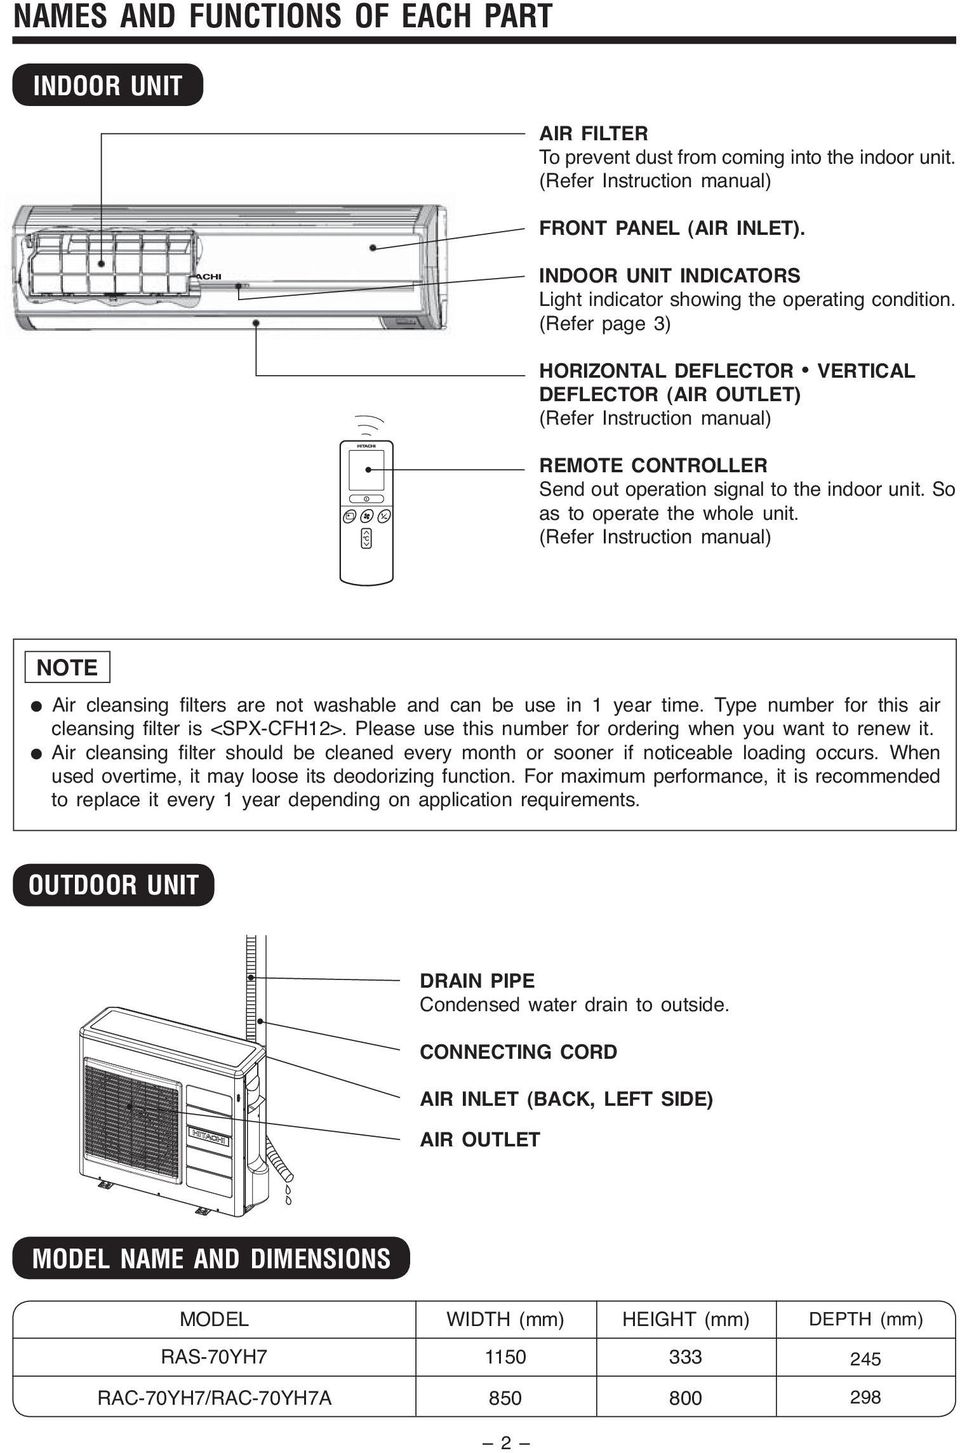 operate the whole unit (Refer Instruction manual) NOTE Air cleansing lters are not washable and can be use in 1 year time Type number for this air cleansing lter is <SPX-CFH12> Please use this number